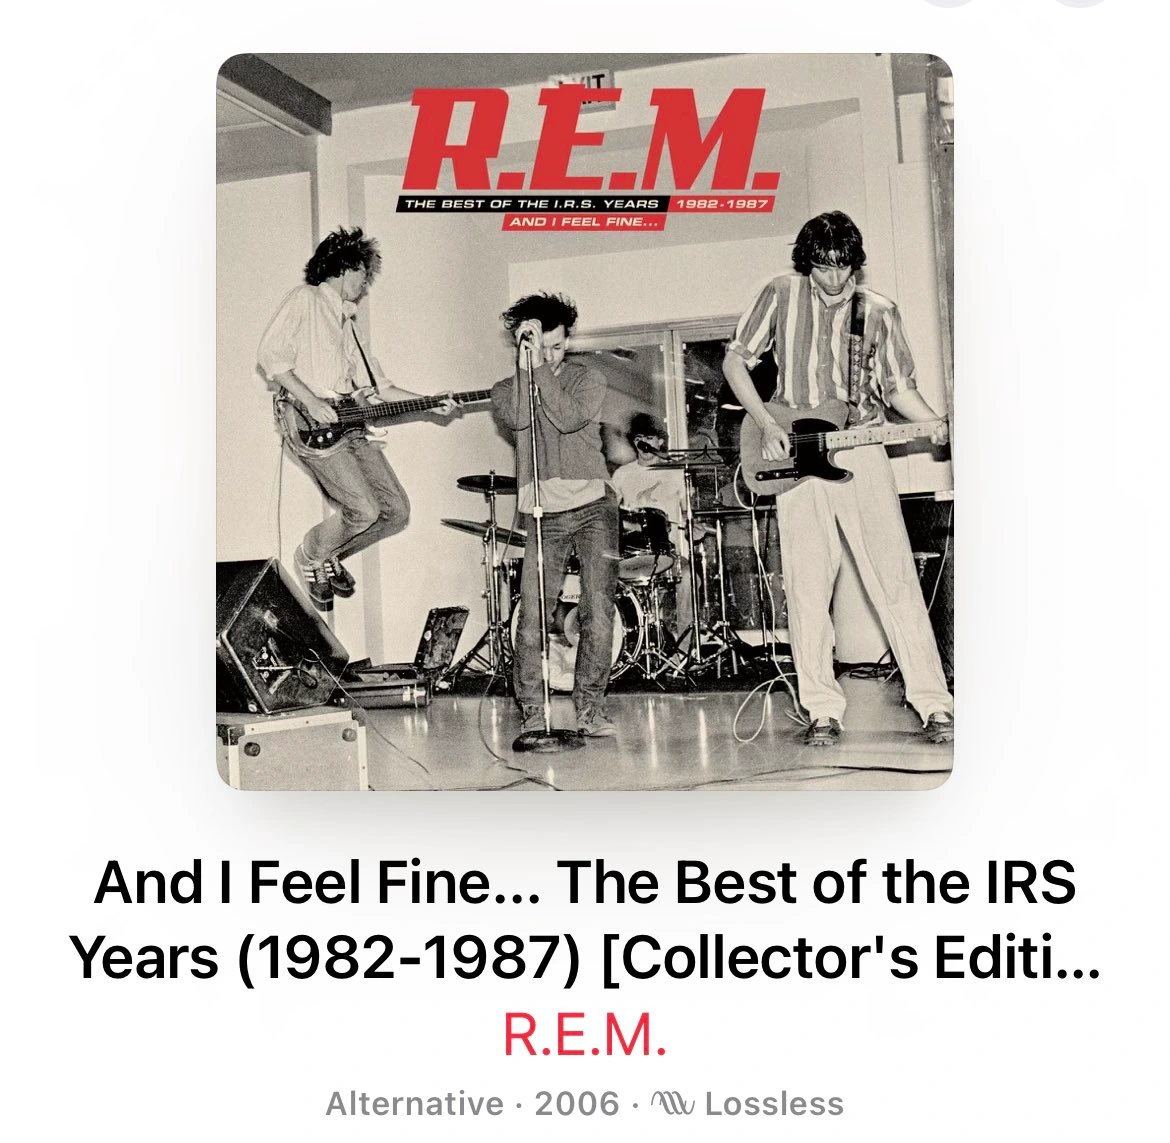 REM the best of the IRS Years 1982-1987